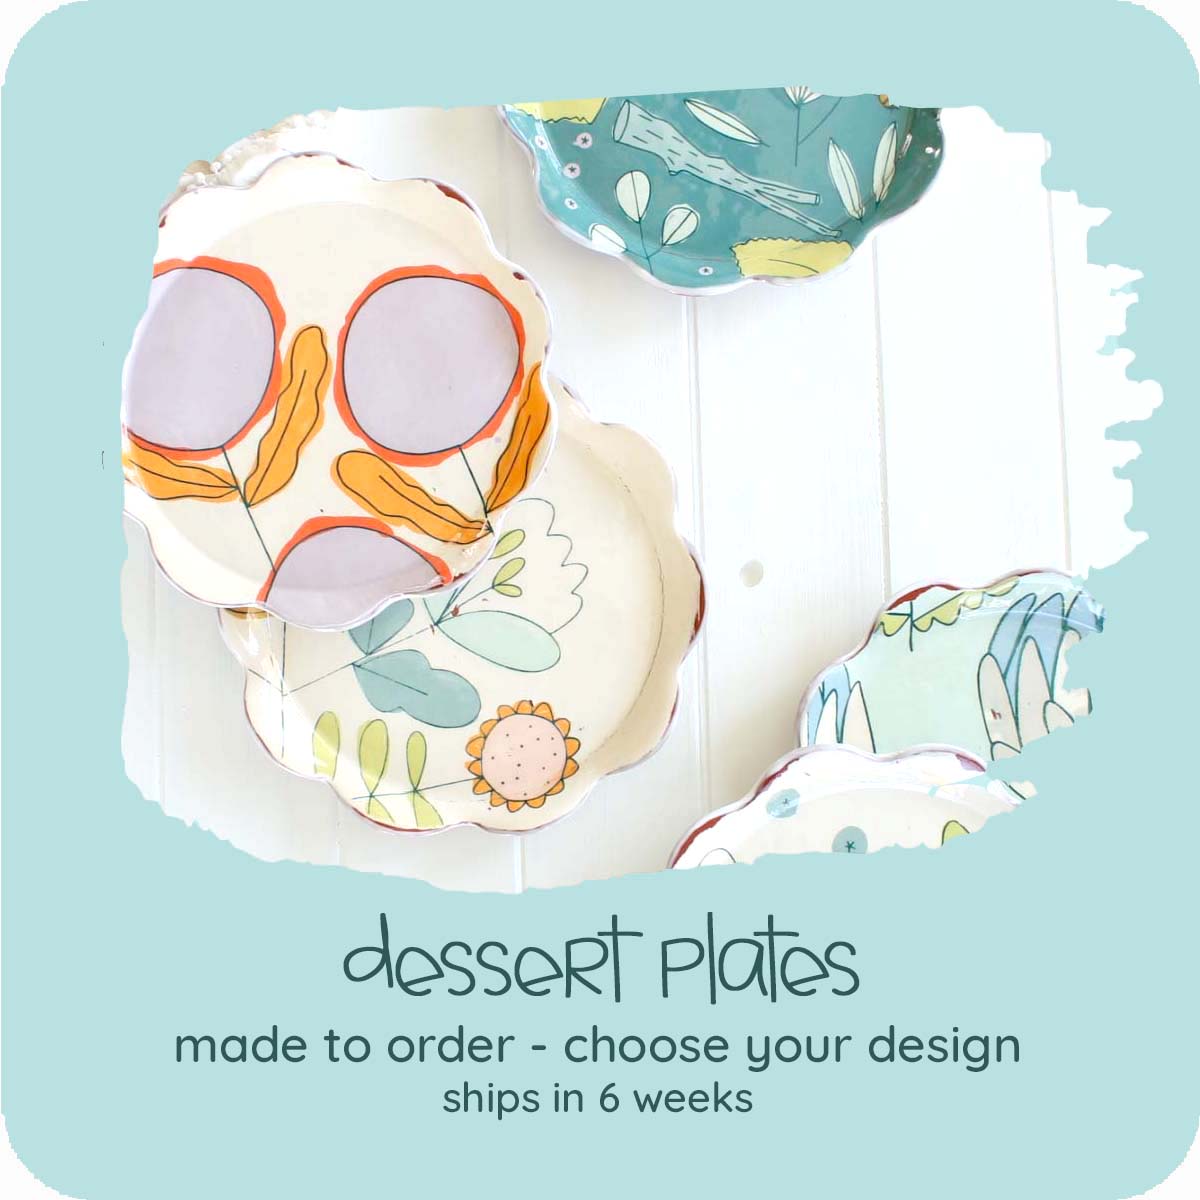 MADE TO ORDER Dessert Plates